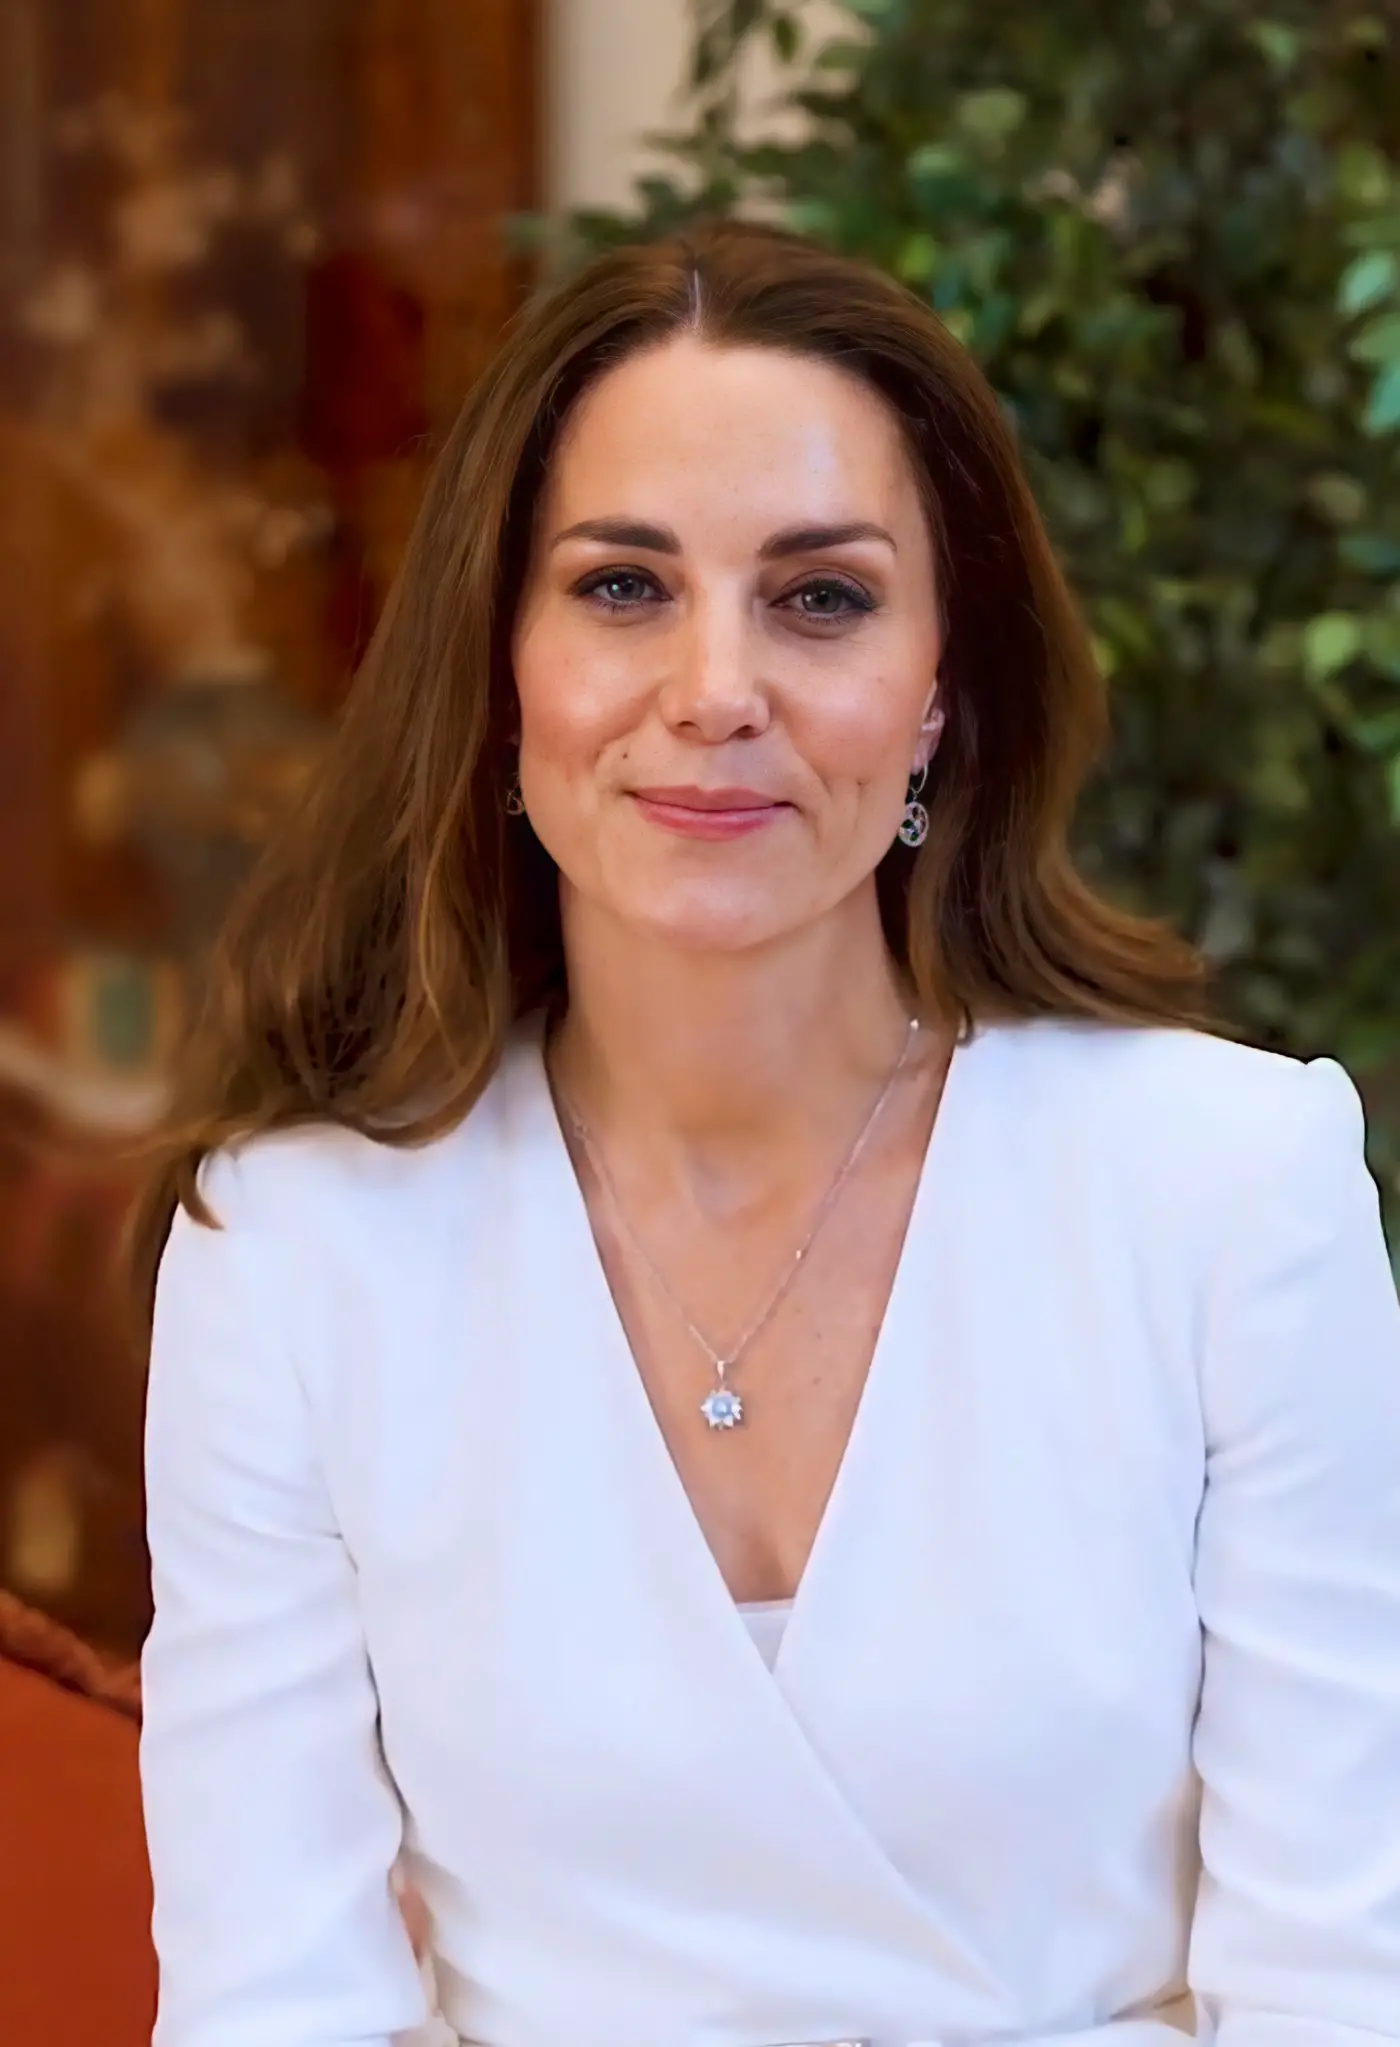 The Patron of Nursing Now campaign, The Duchess of Cambridge, released a video message to thank the nurses around the globe at the end of the campaign